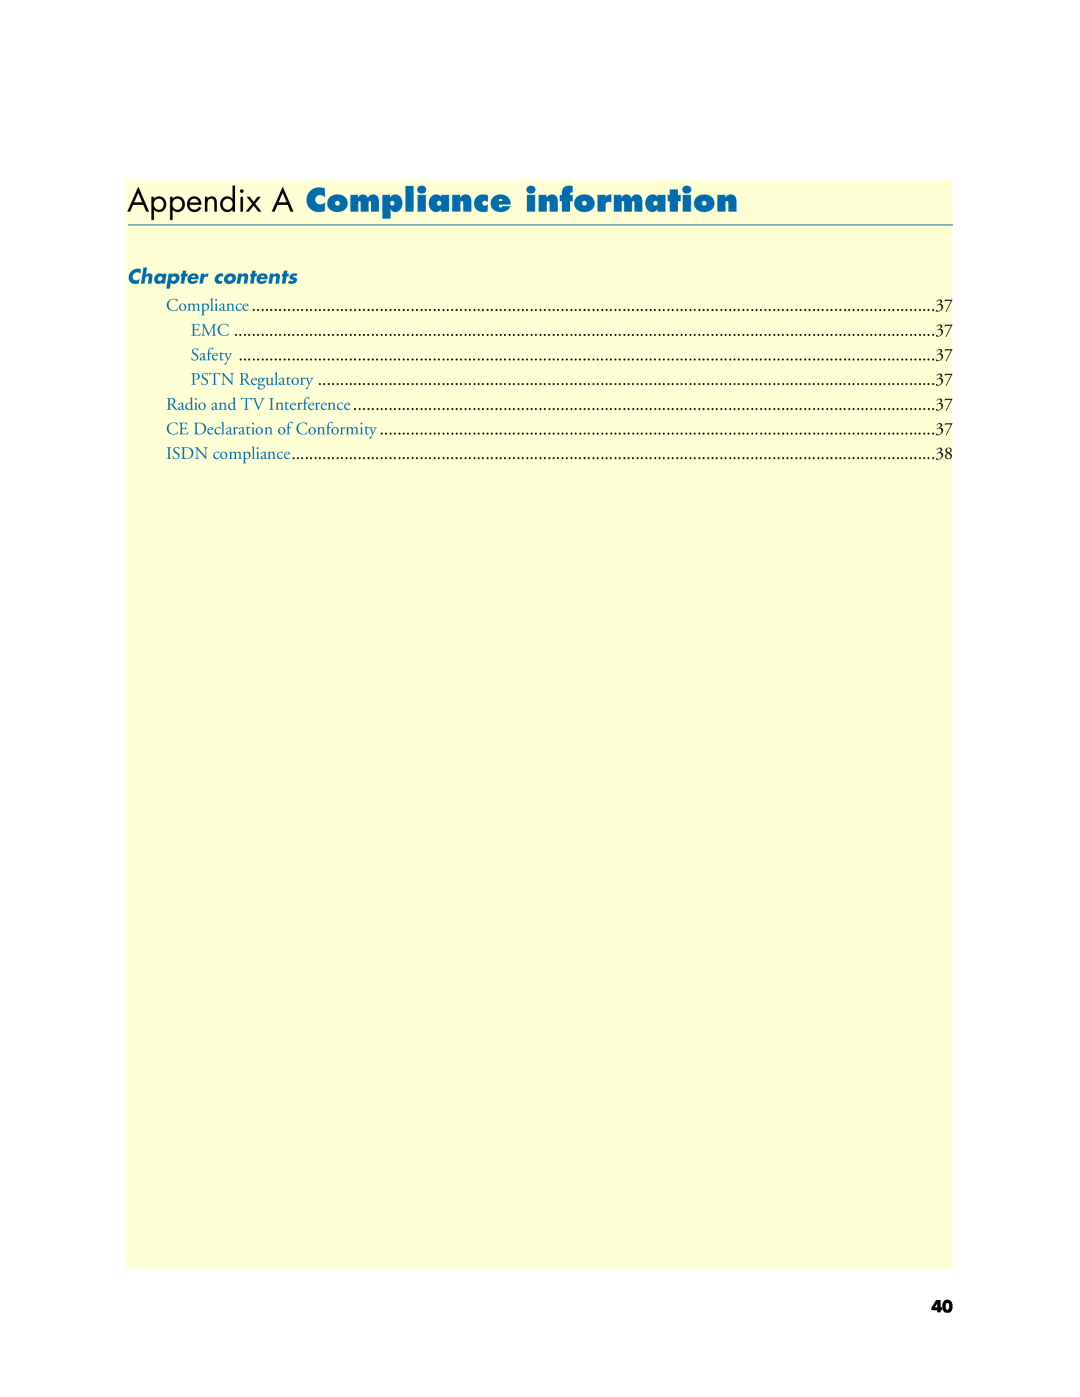 Patton electronic 4630 Series manual Appendix A Compliance information, Chapter contents 